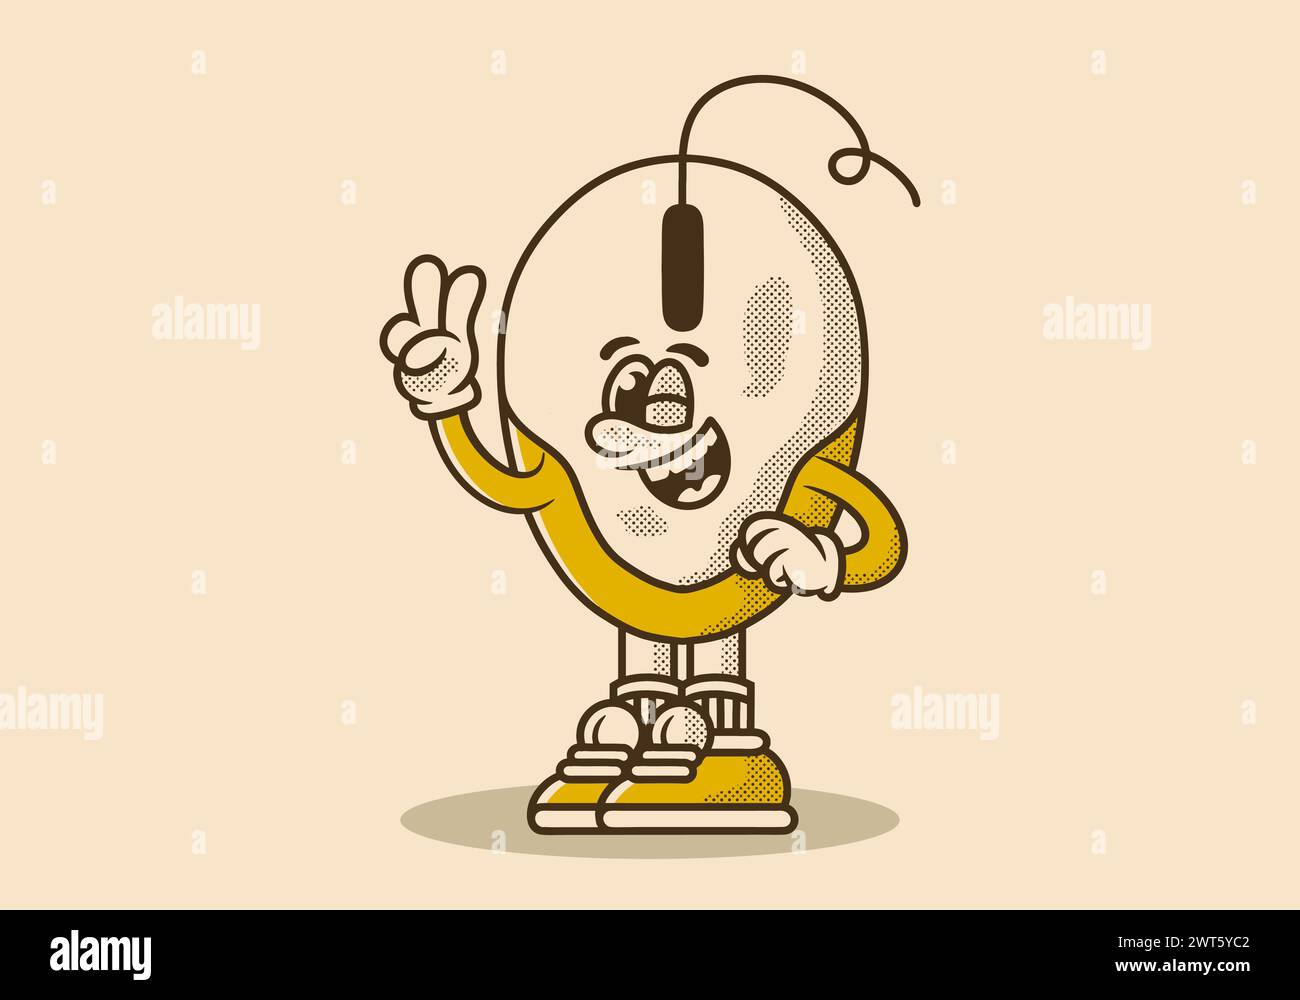 Vintage mascot character illustration of a computer mouse with hands forming a symbol of peace Stock Vector